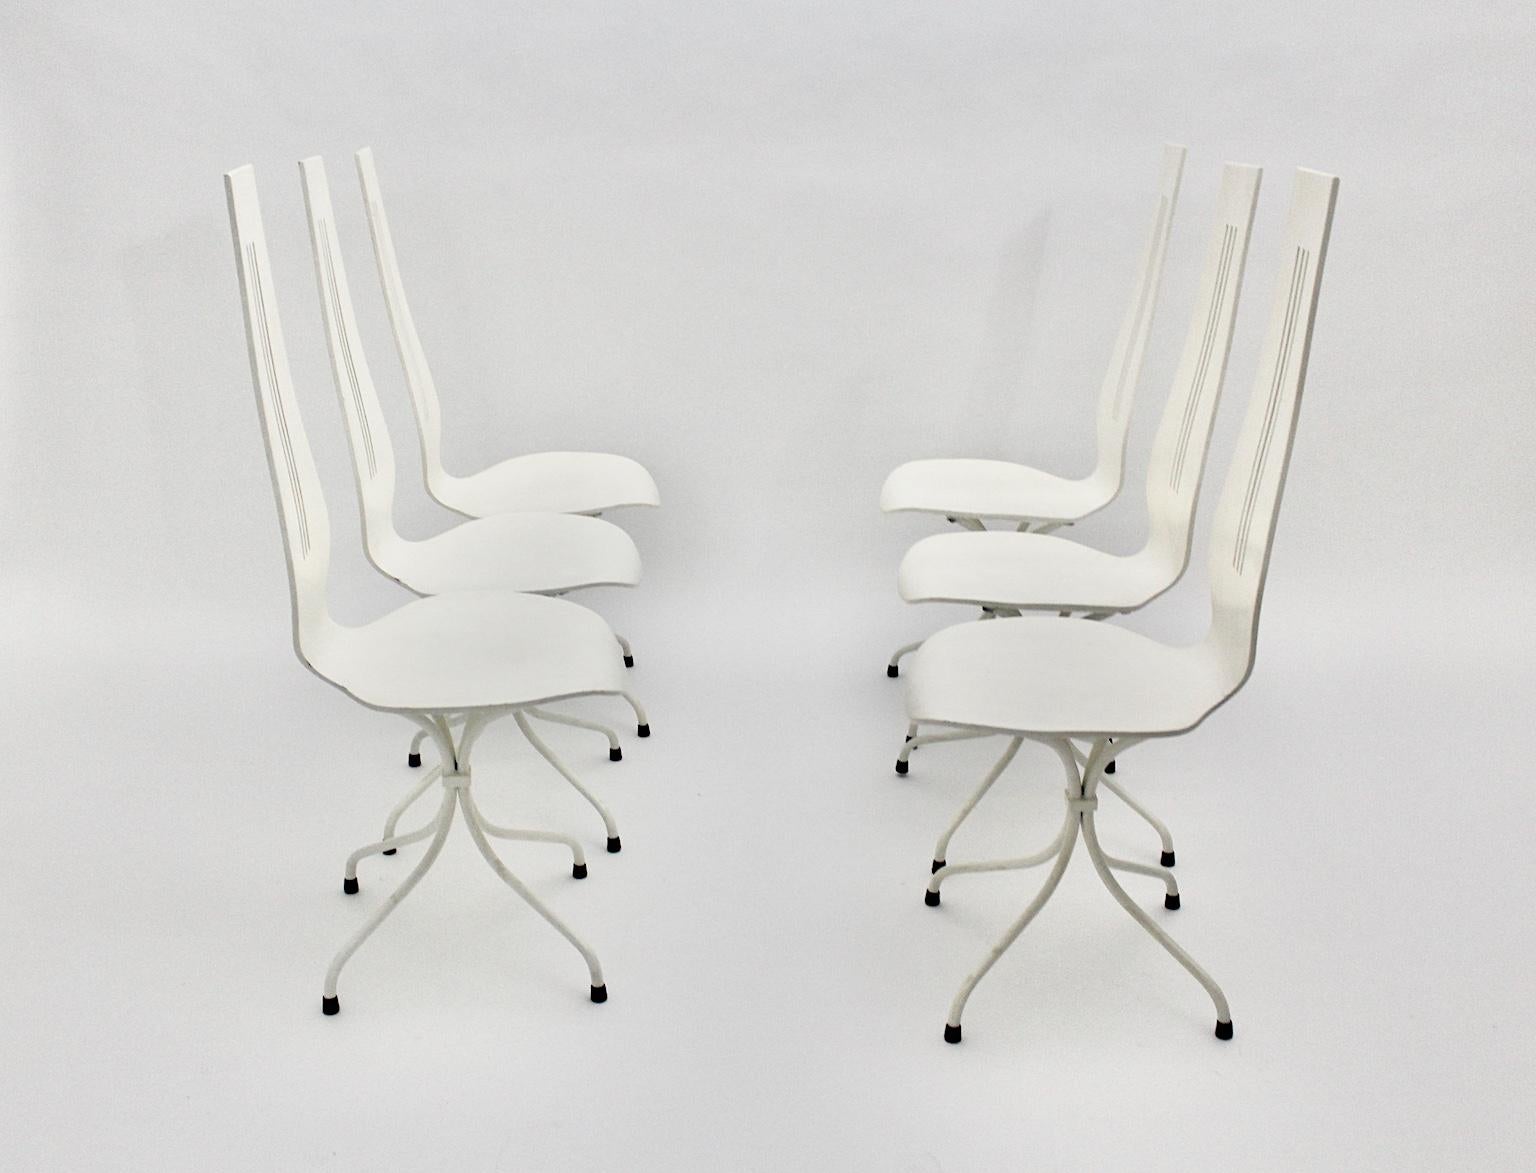 Lacquered Mid-Century Modern White Vintage Dining Chairs by Theo Häberli, 1960 Switzerland For Sale